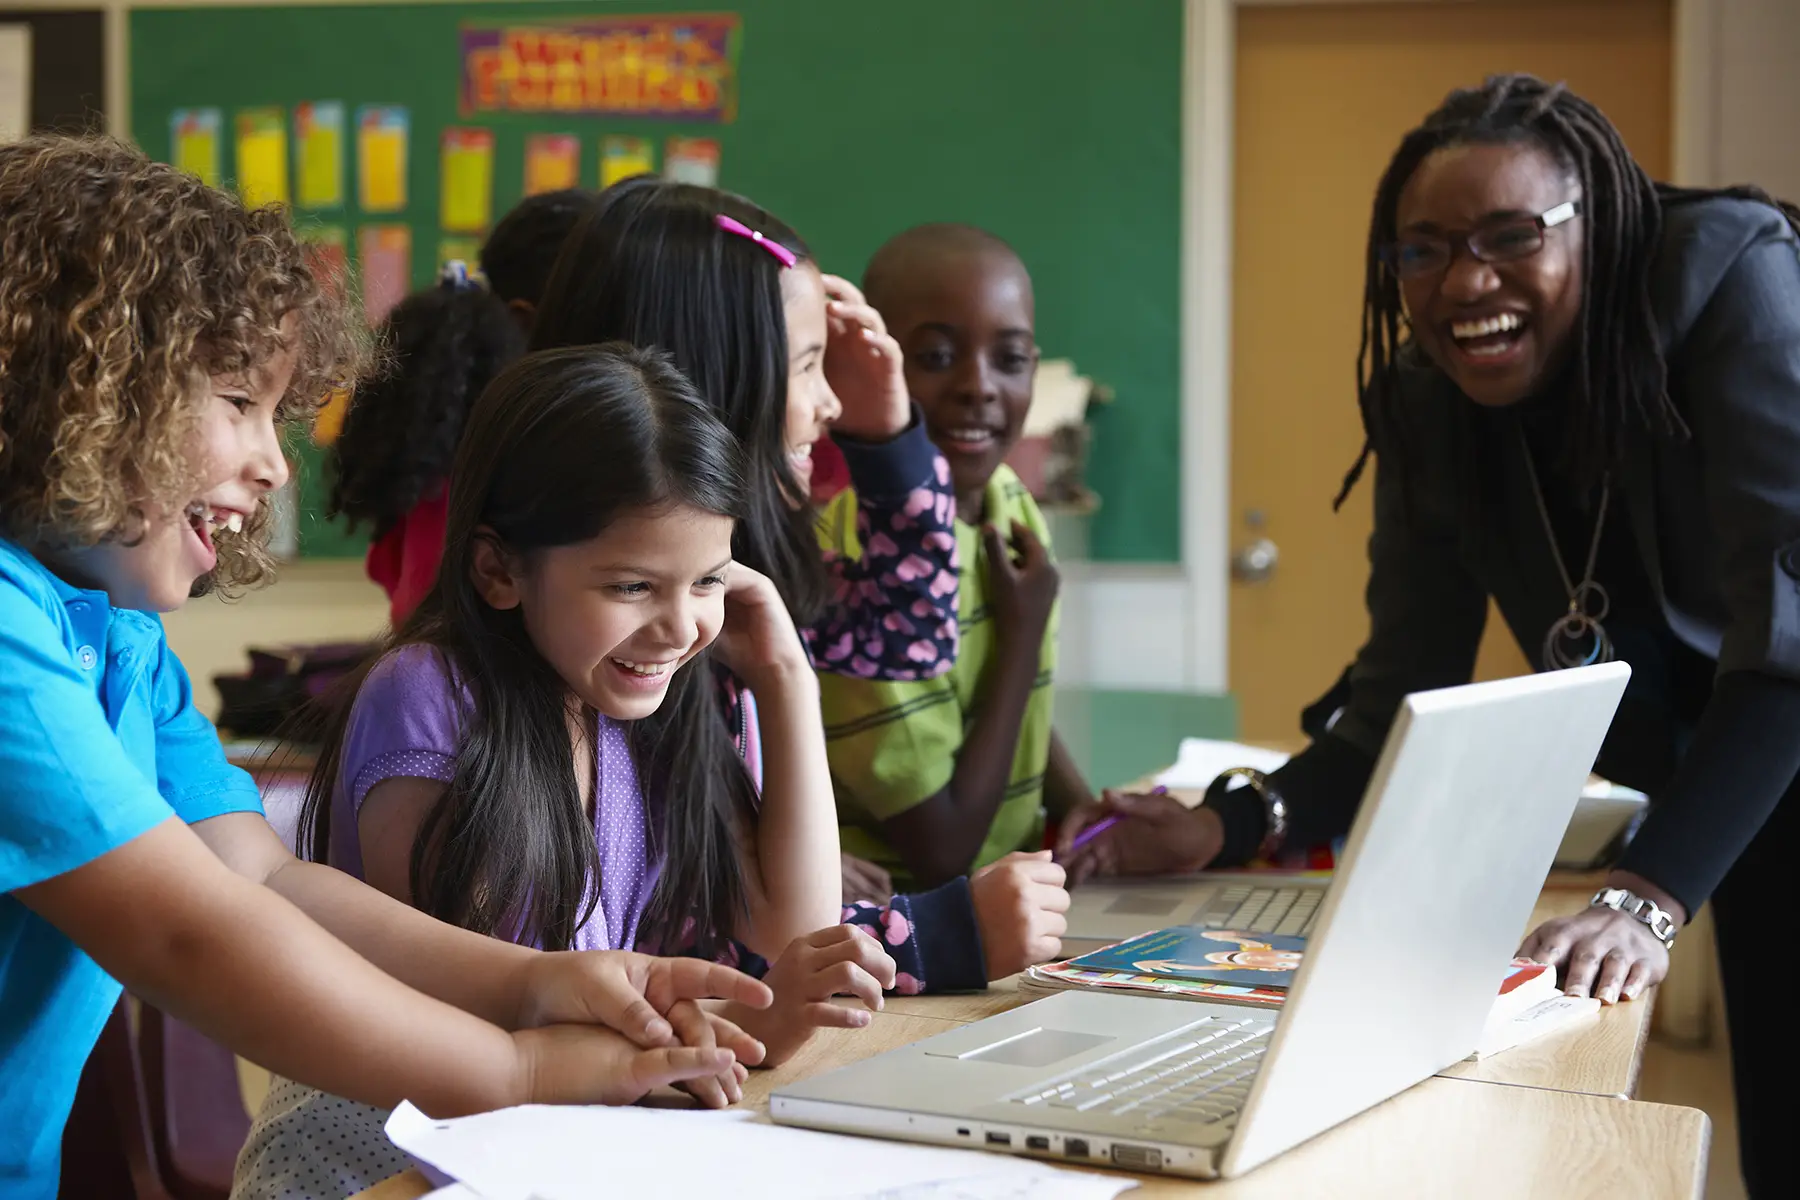 A teacher laughs with her primary school students while they are working on their laptops